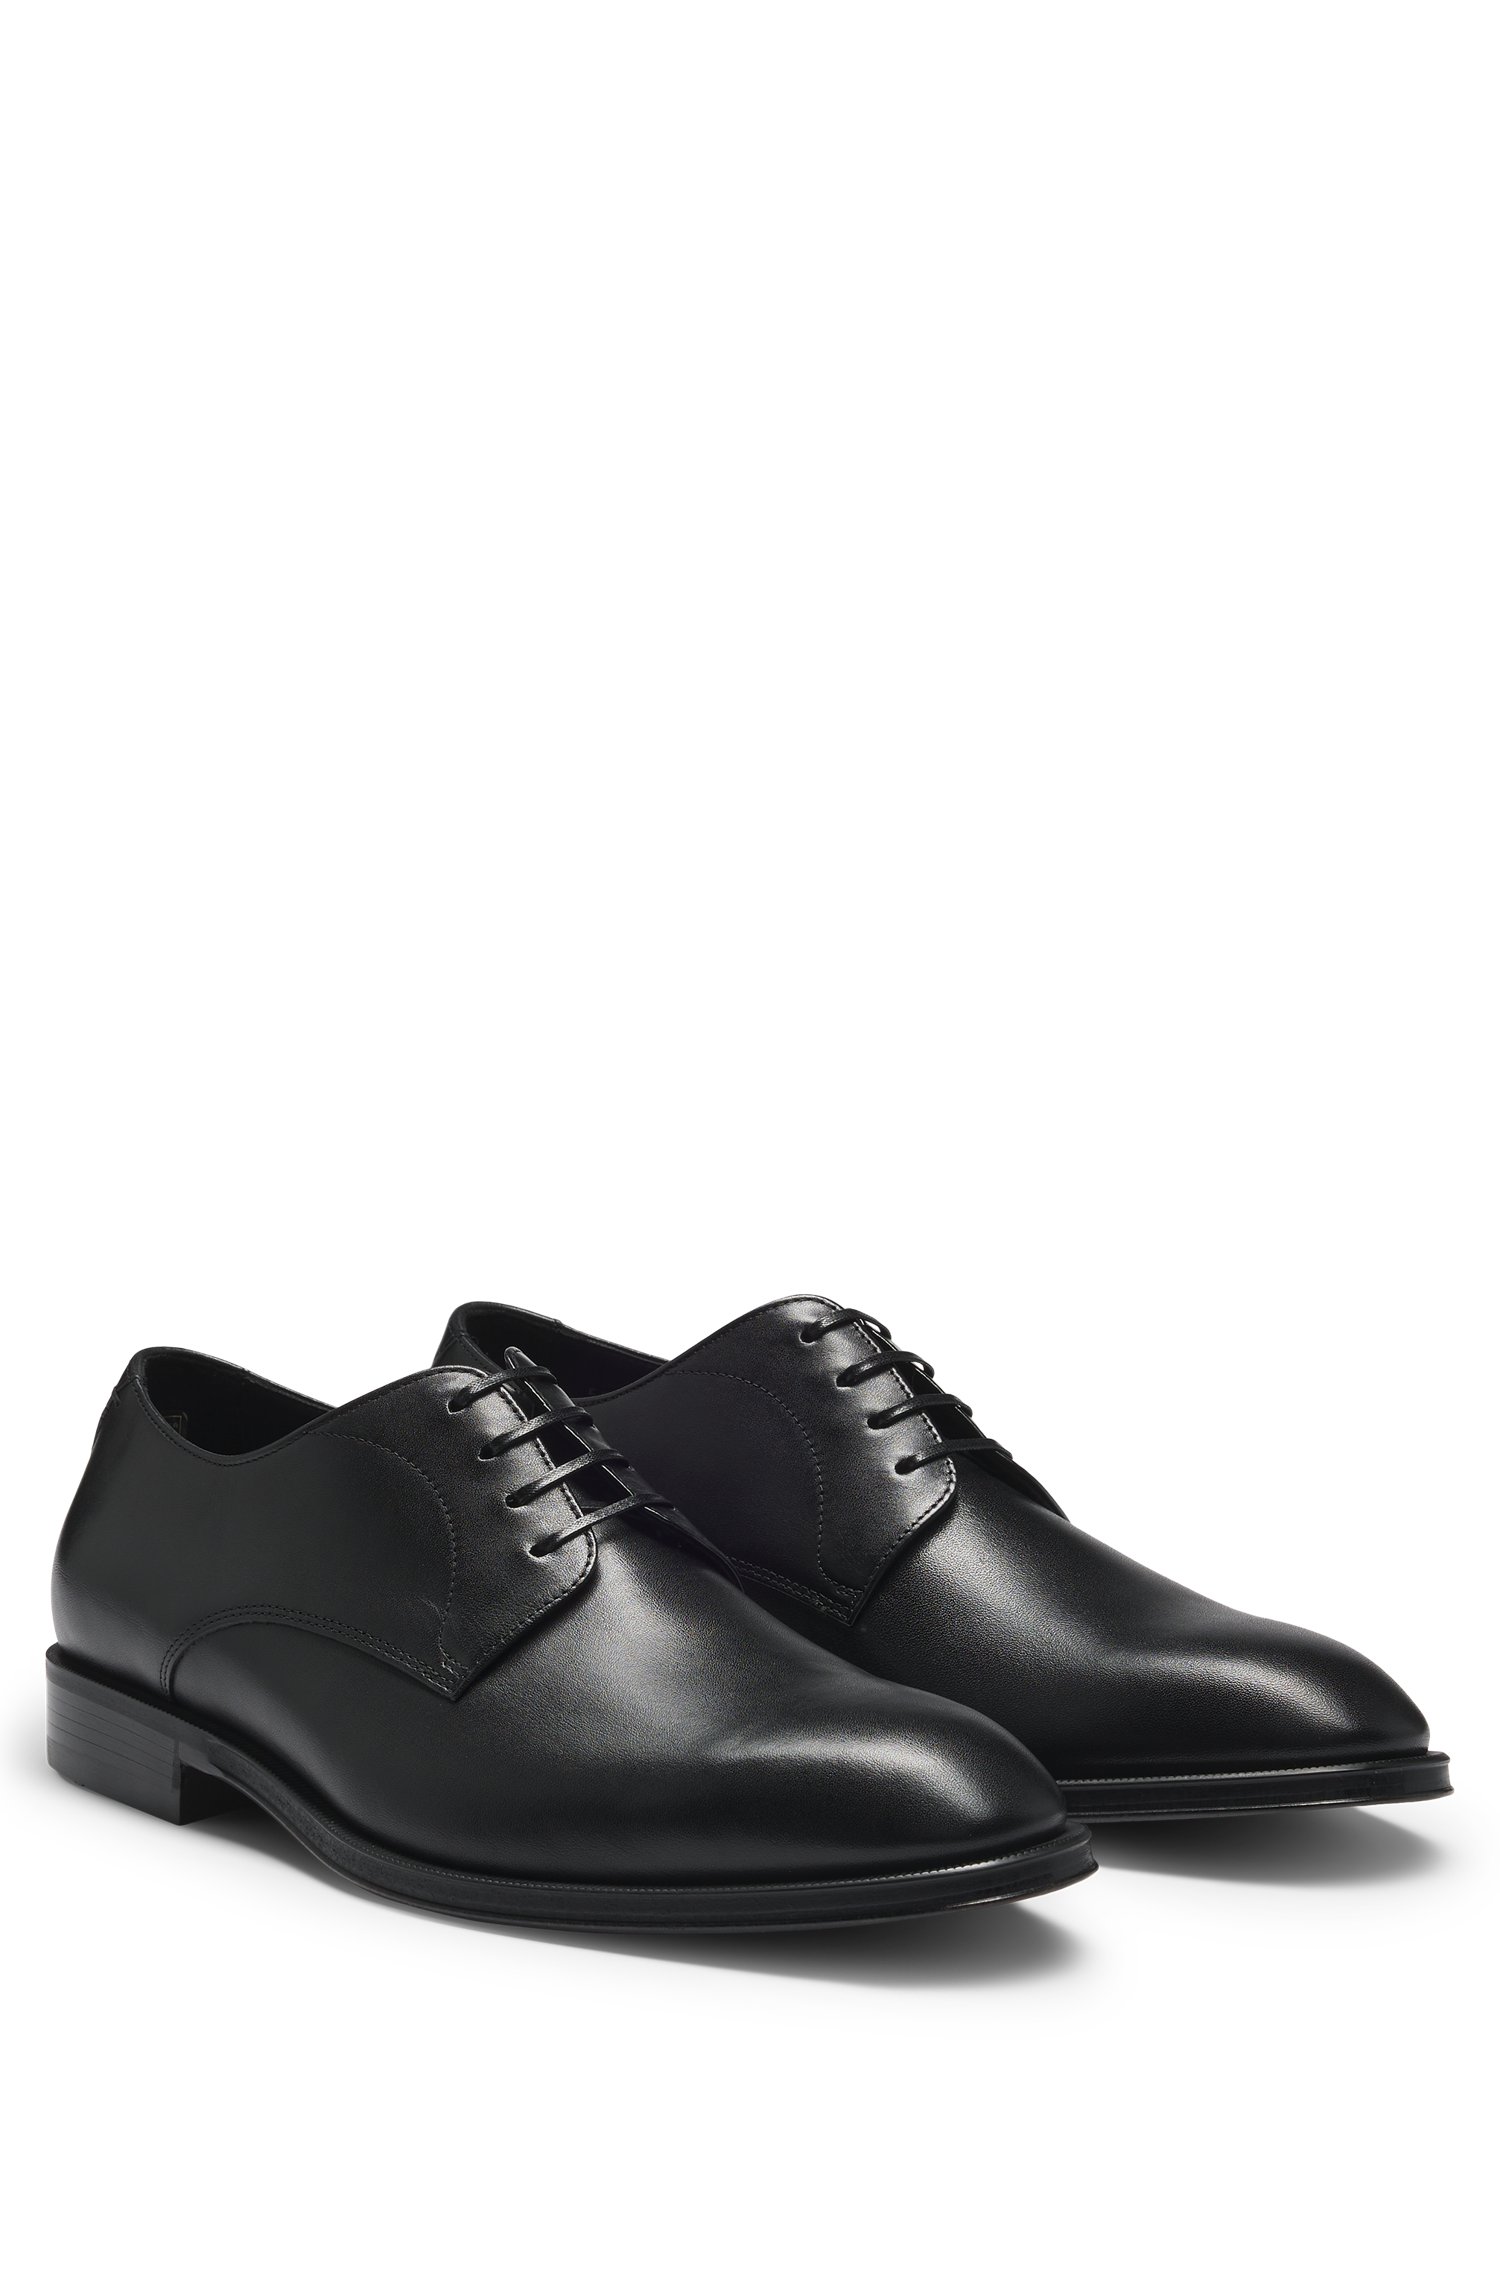 Italian leather Derby shoes with stitching details